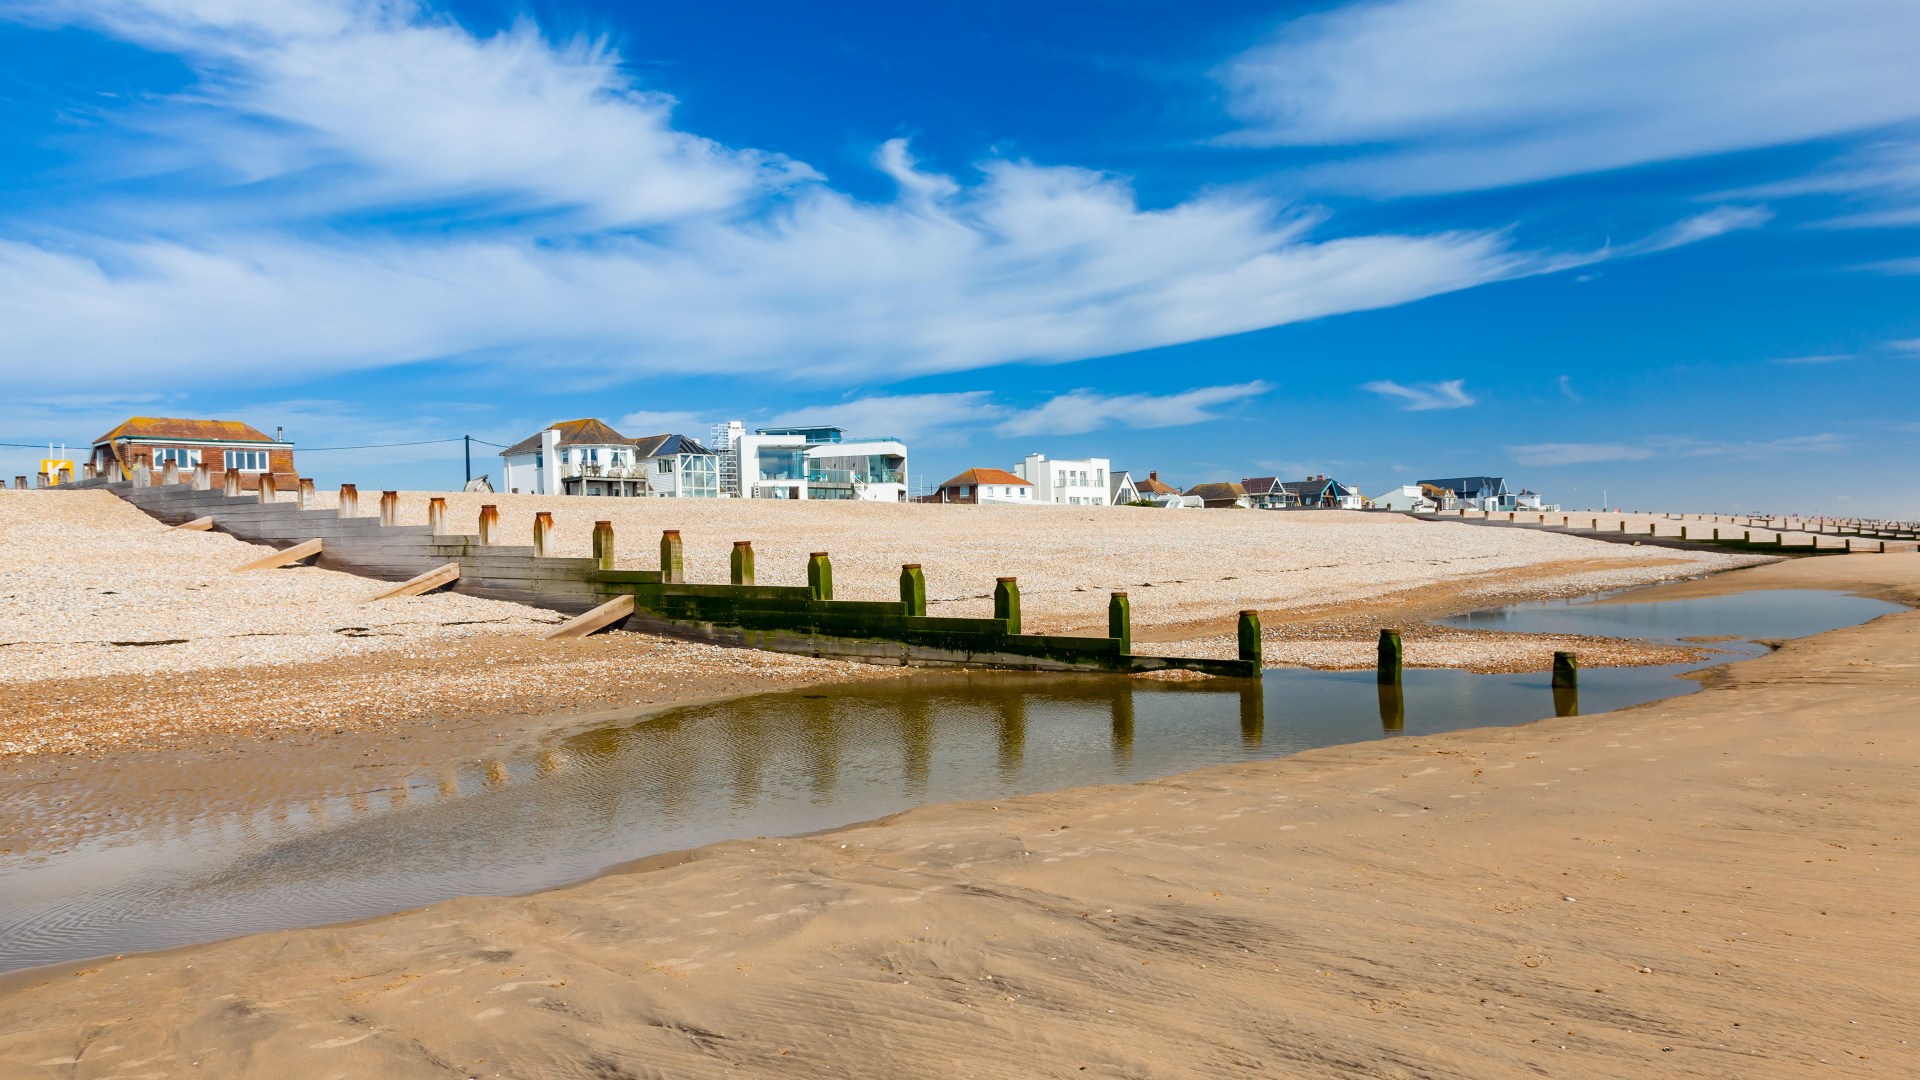 Discover the Top UK Beach Celebrity Hotspot for Spring Fun in the Sun